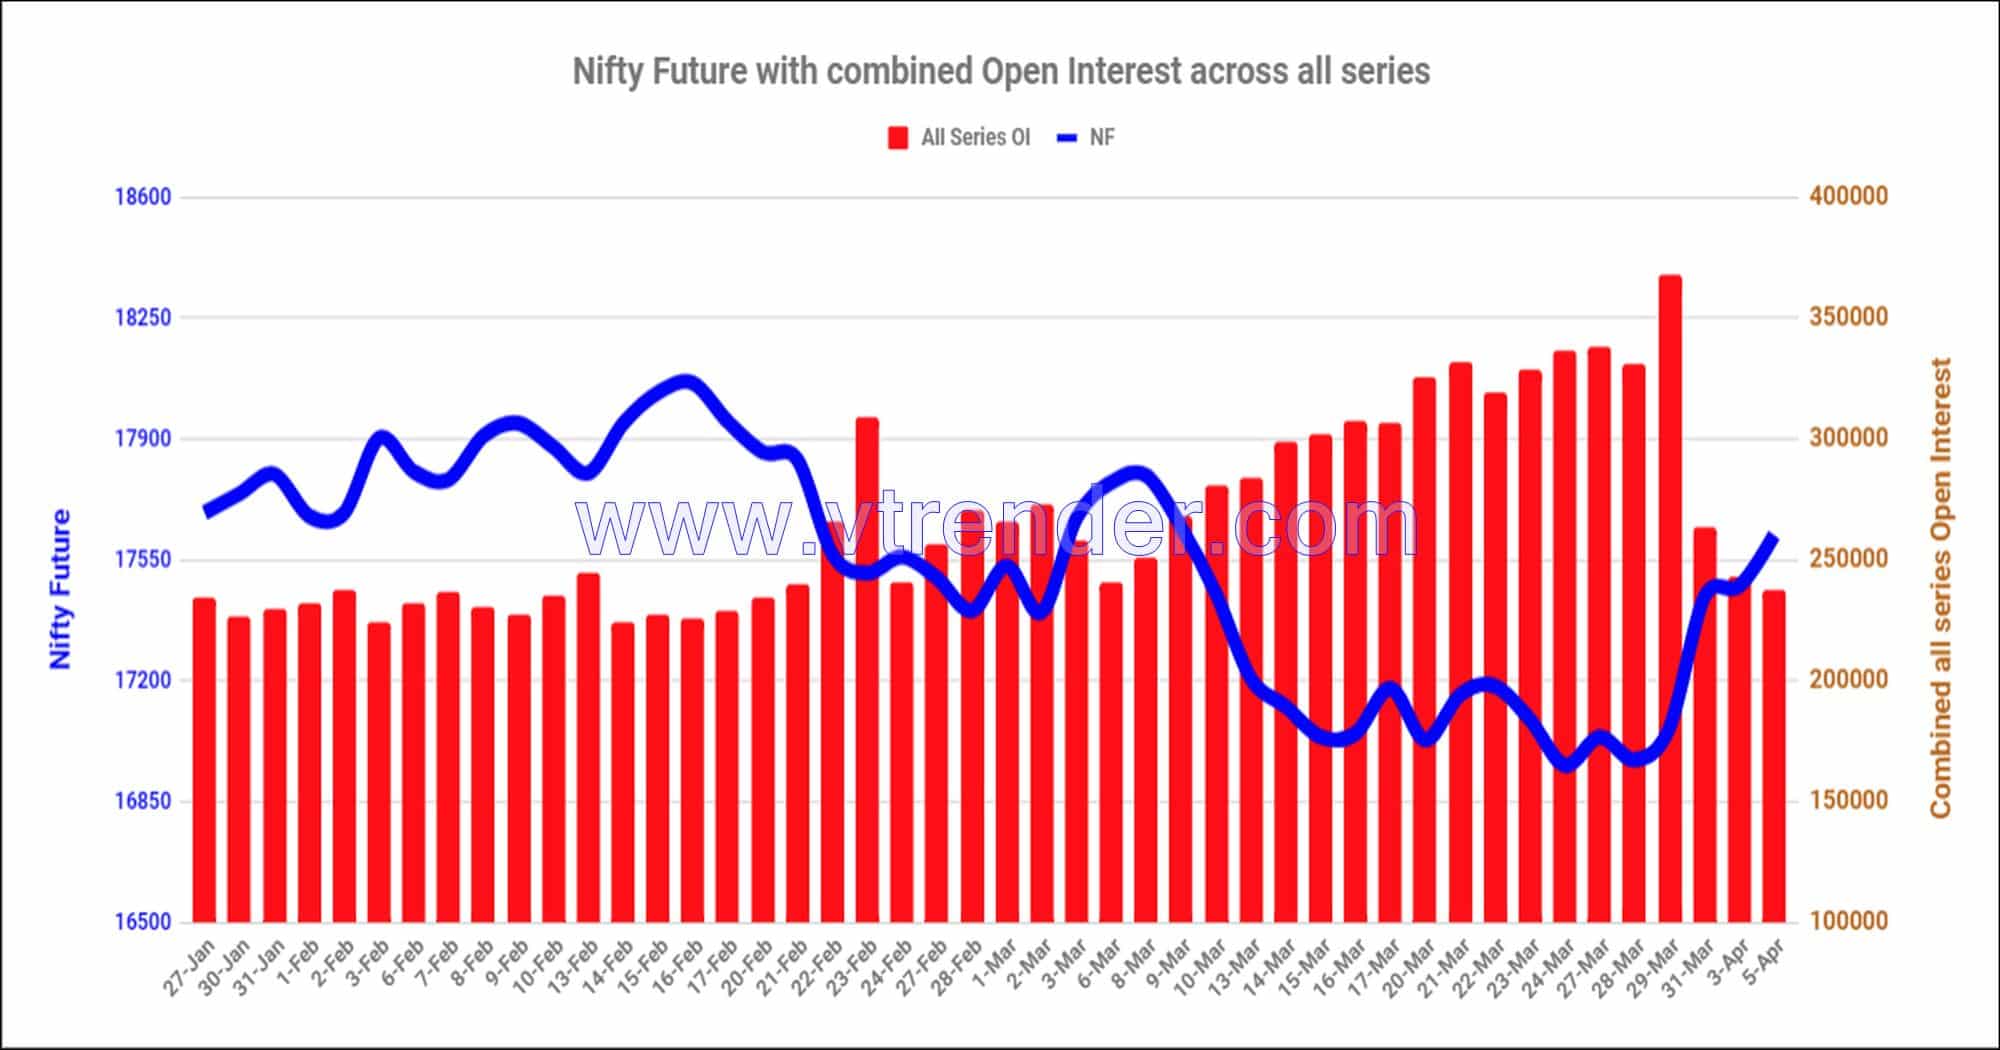 Nf05Apr Nifty And Banknifty Futures With All Series Combined Open Interest – 5Th Apr 2023 Banknifty, Nifty, Open Interest